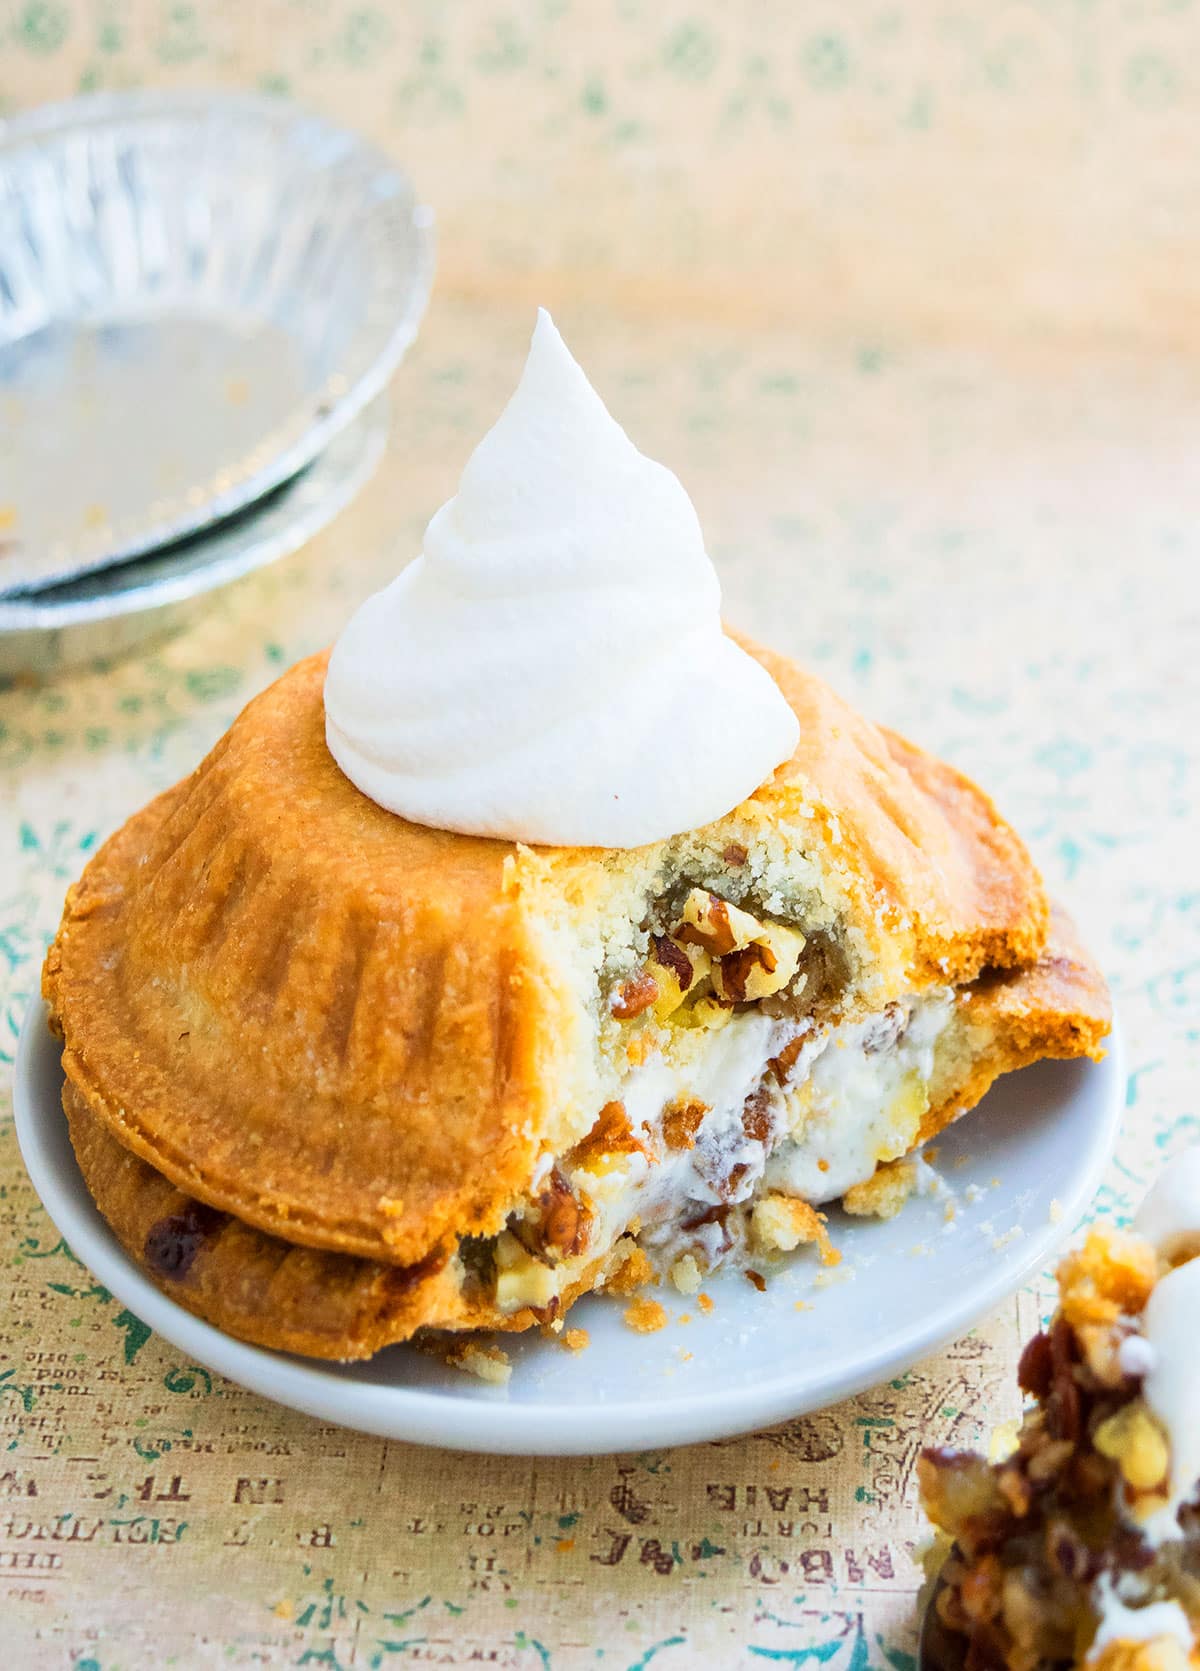 Mini Pie Sandwich With Whipped Cream on White Plate